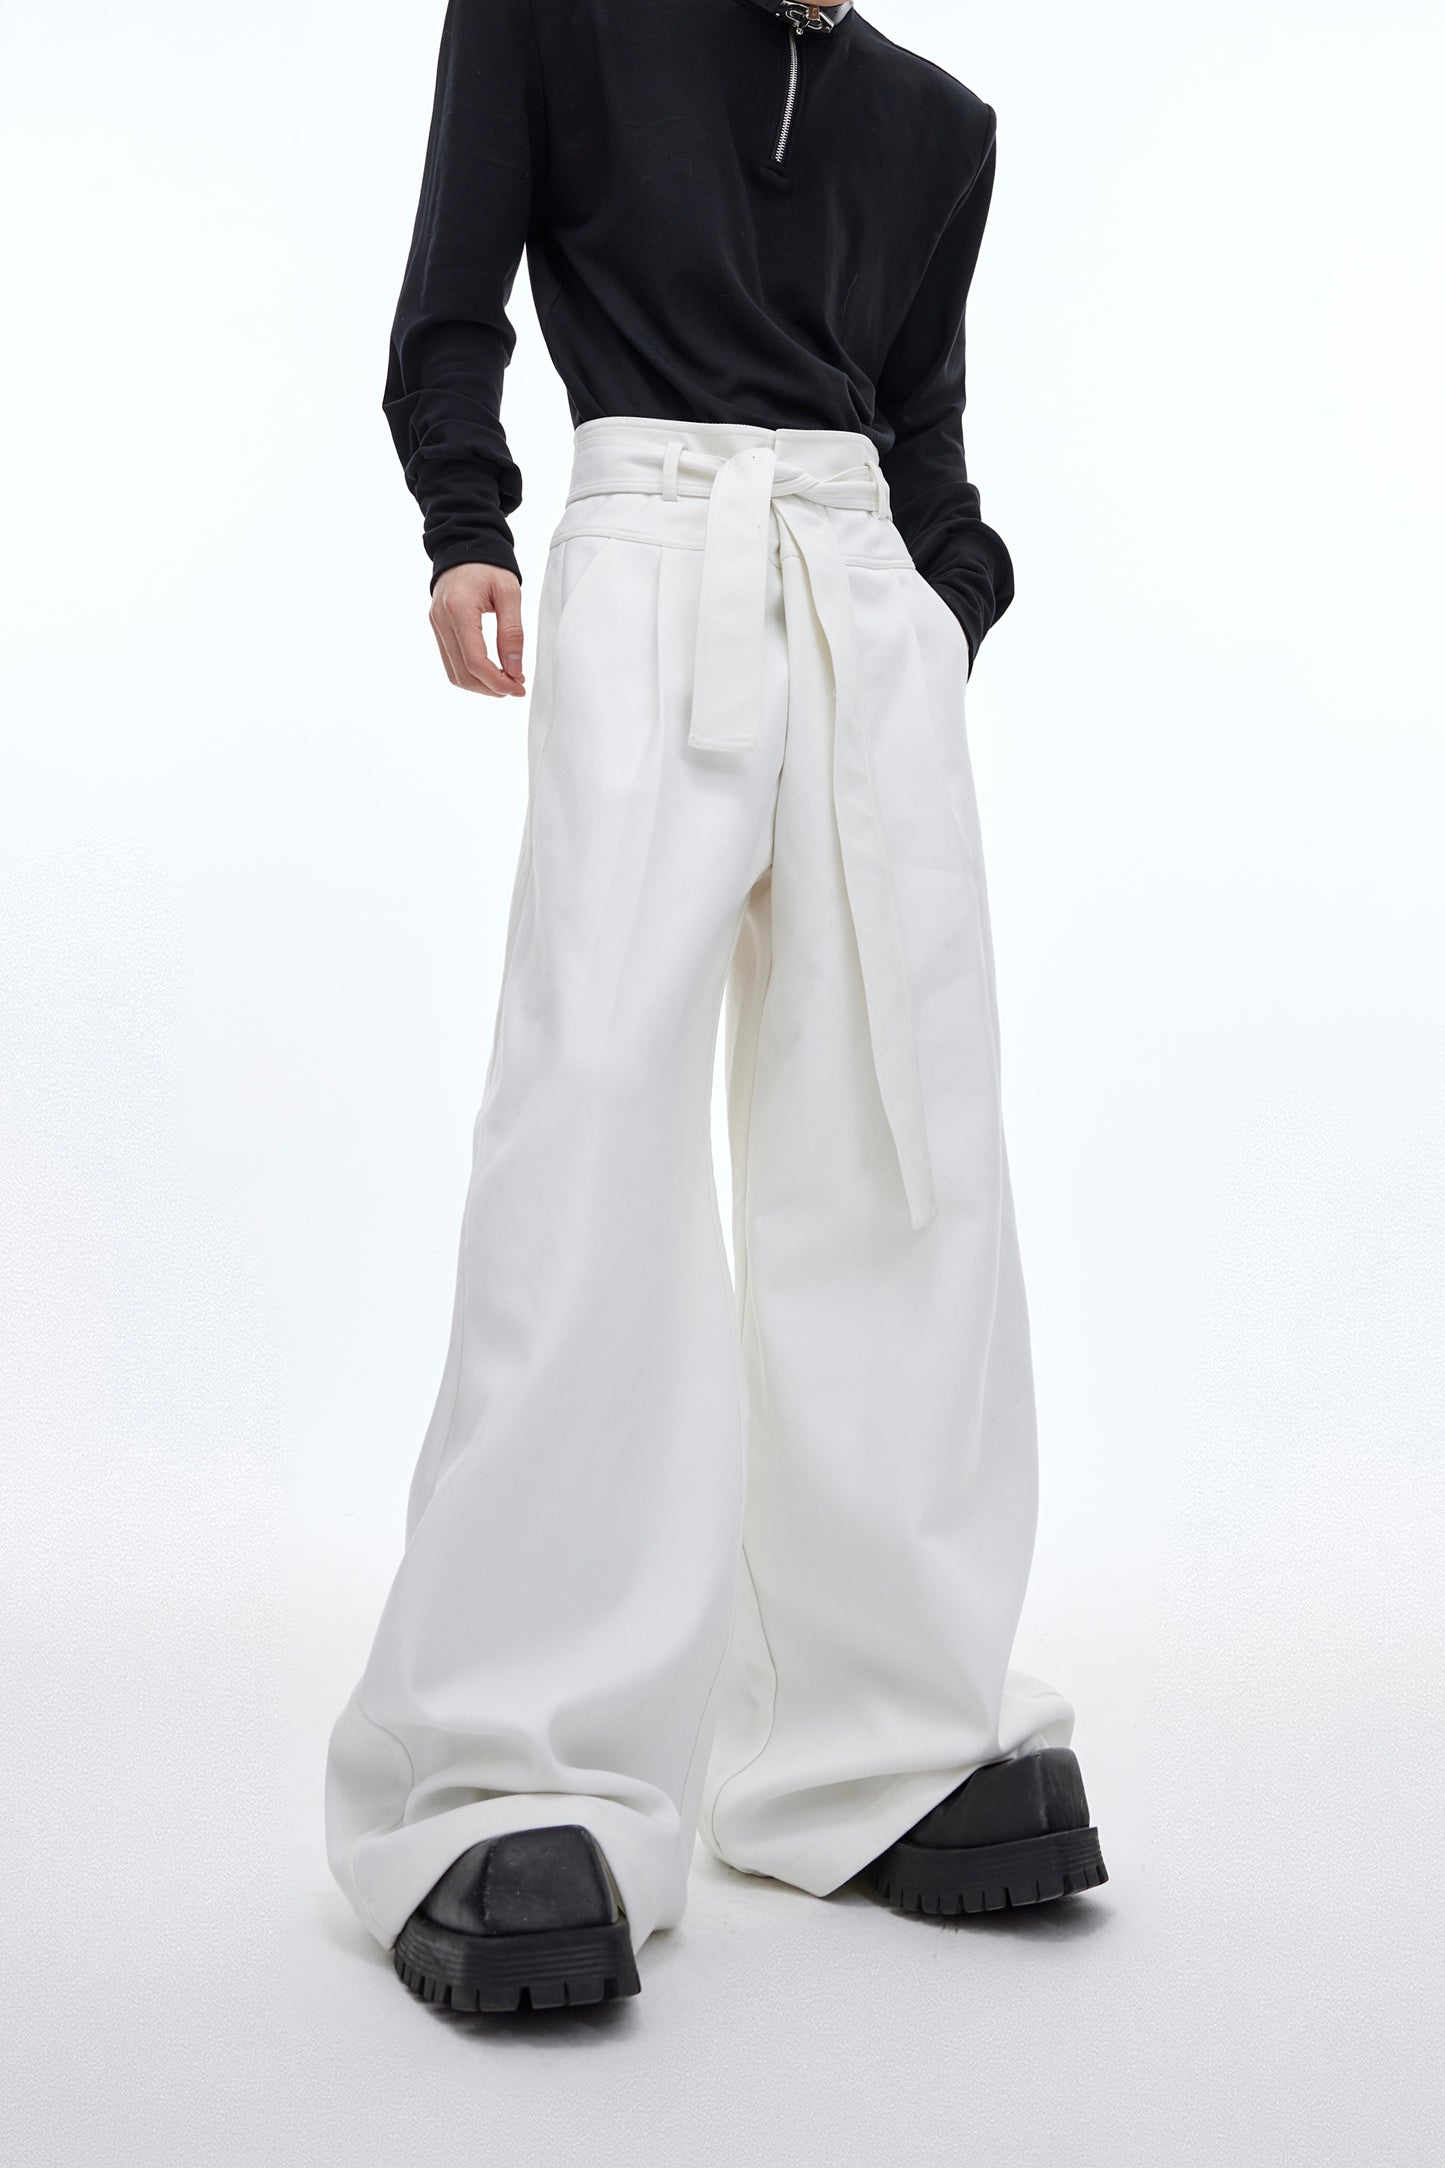 【23s December.】Solid Color High Waist Strap Design Casual Pants